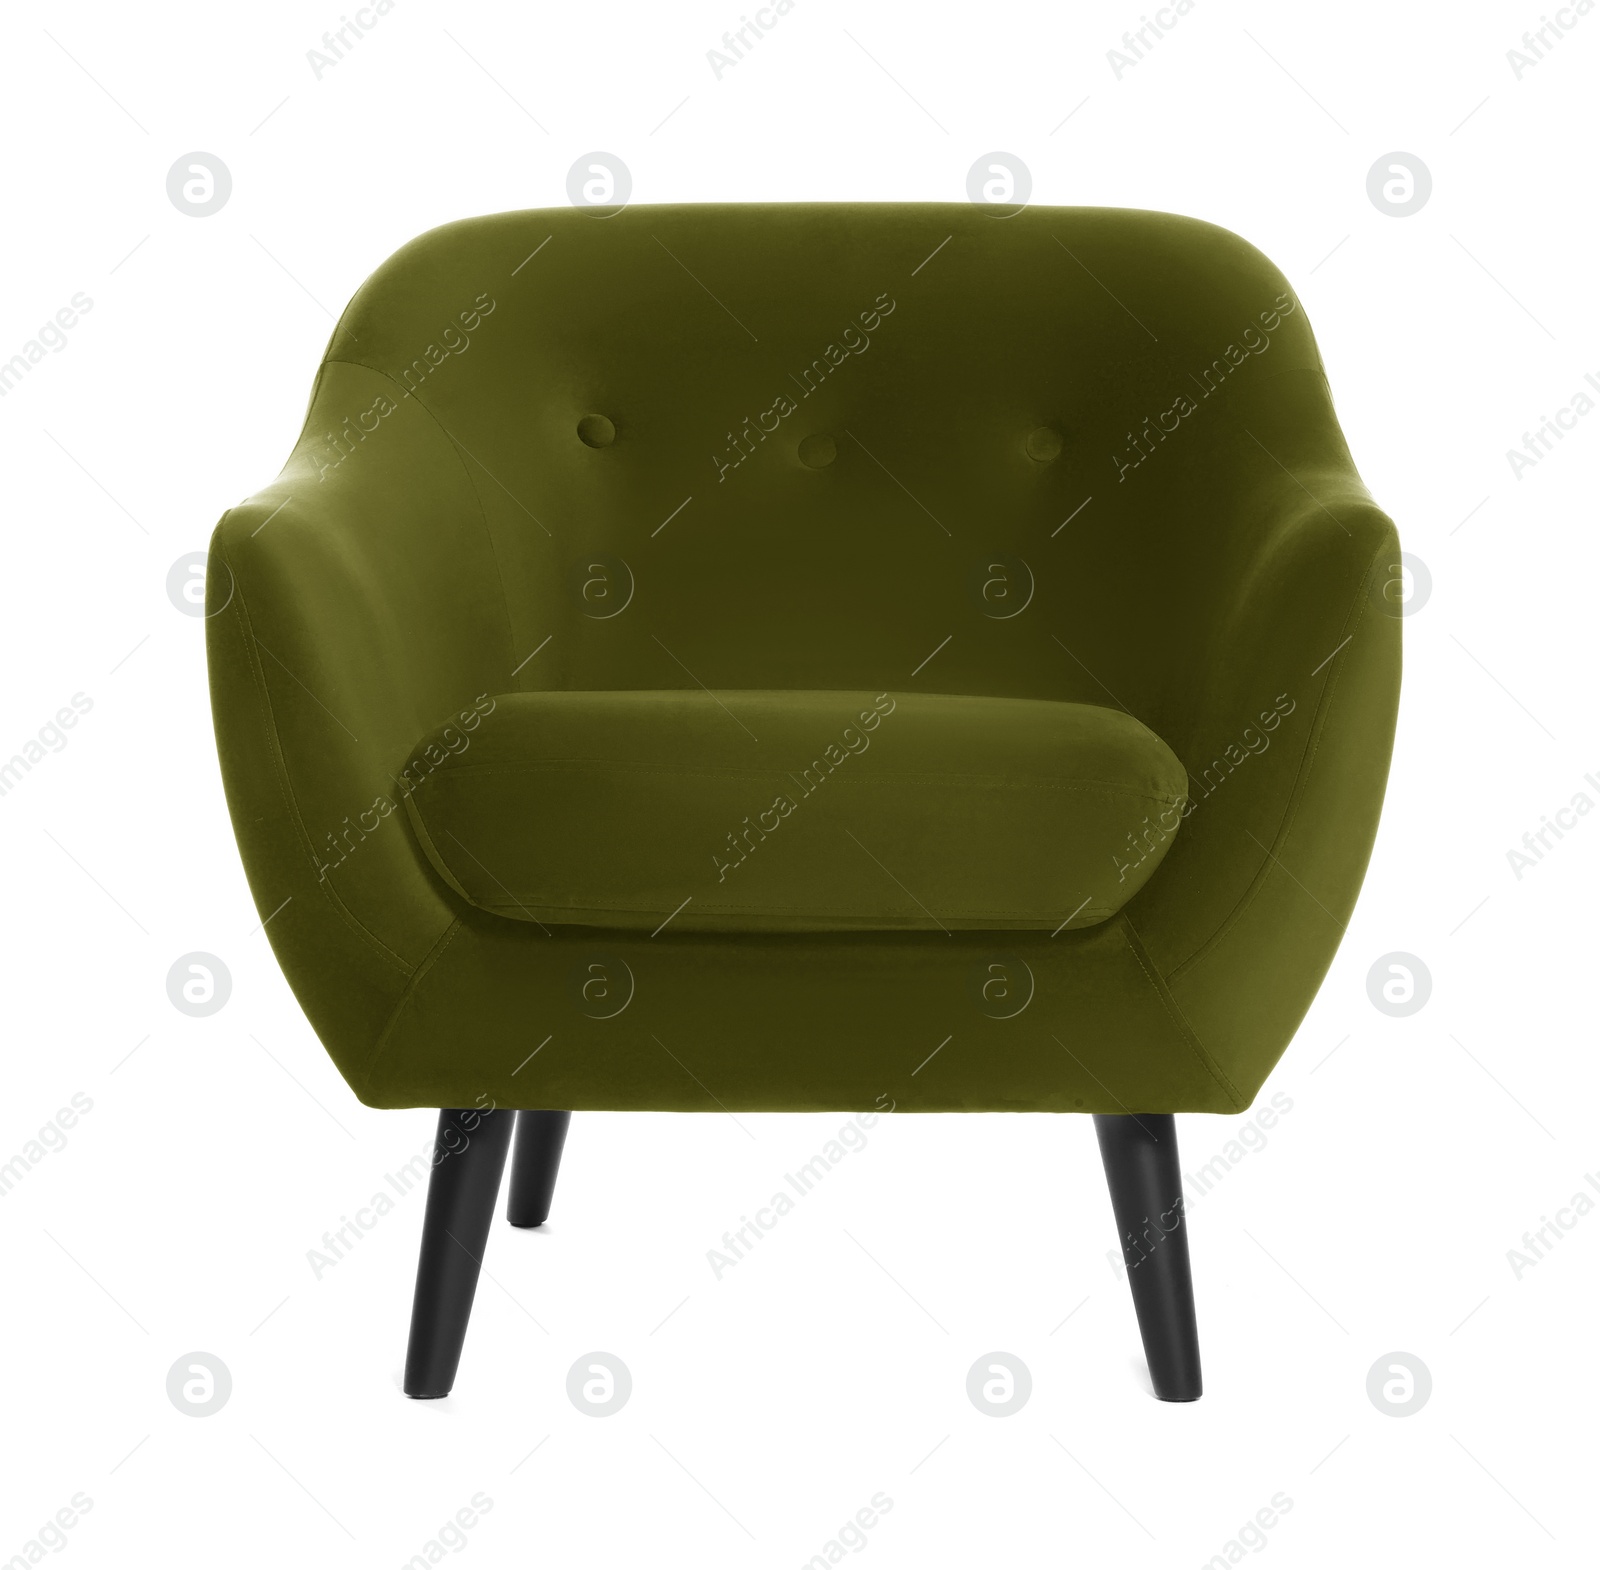 Image of One comfortable dark moss green armchair isolated on white